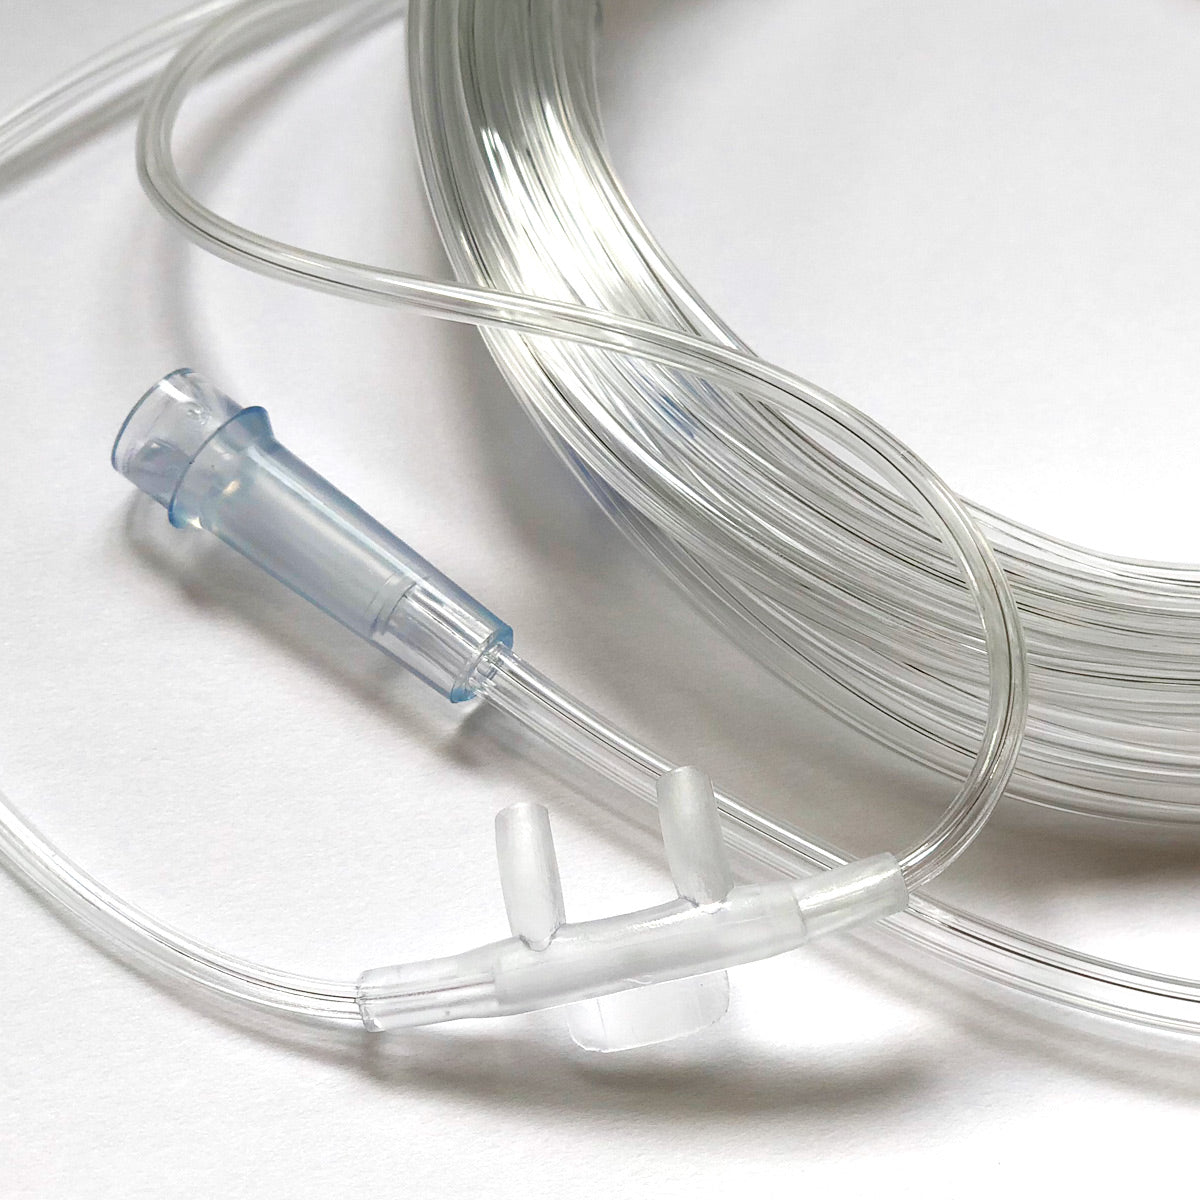 3B Standard Nasal Cannula with 12 Foot Oxygen Supply Tubing